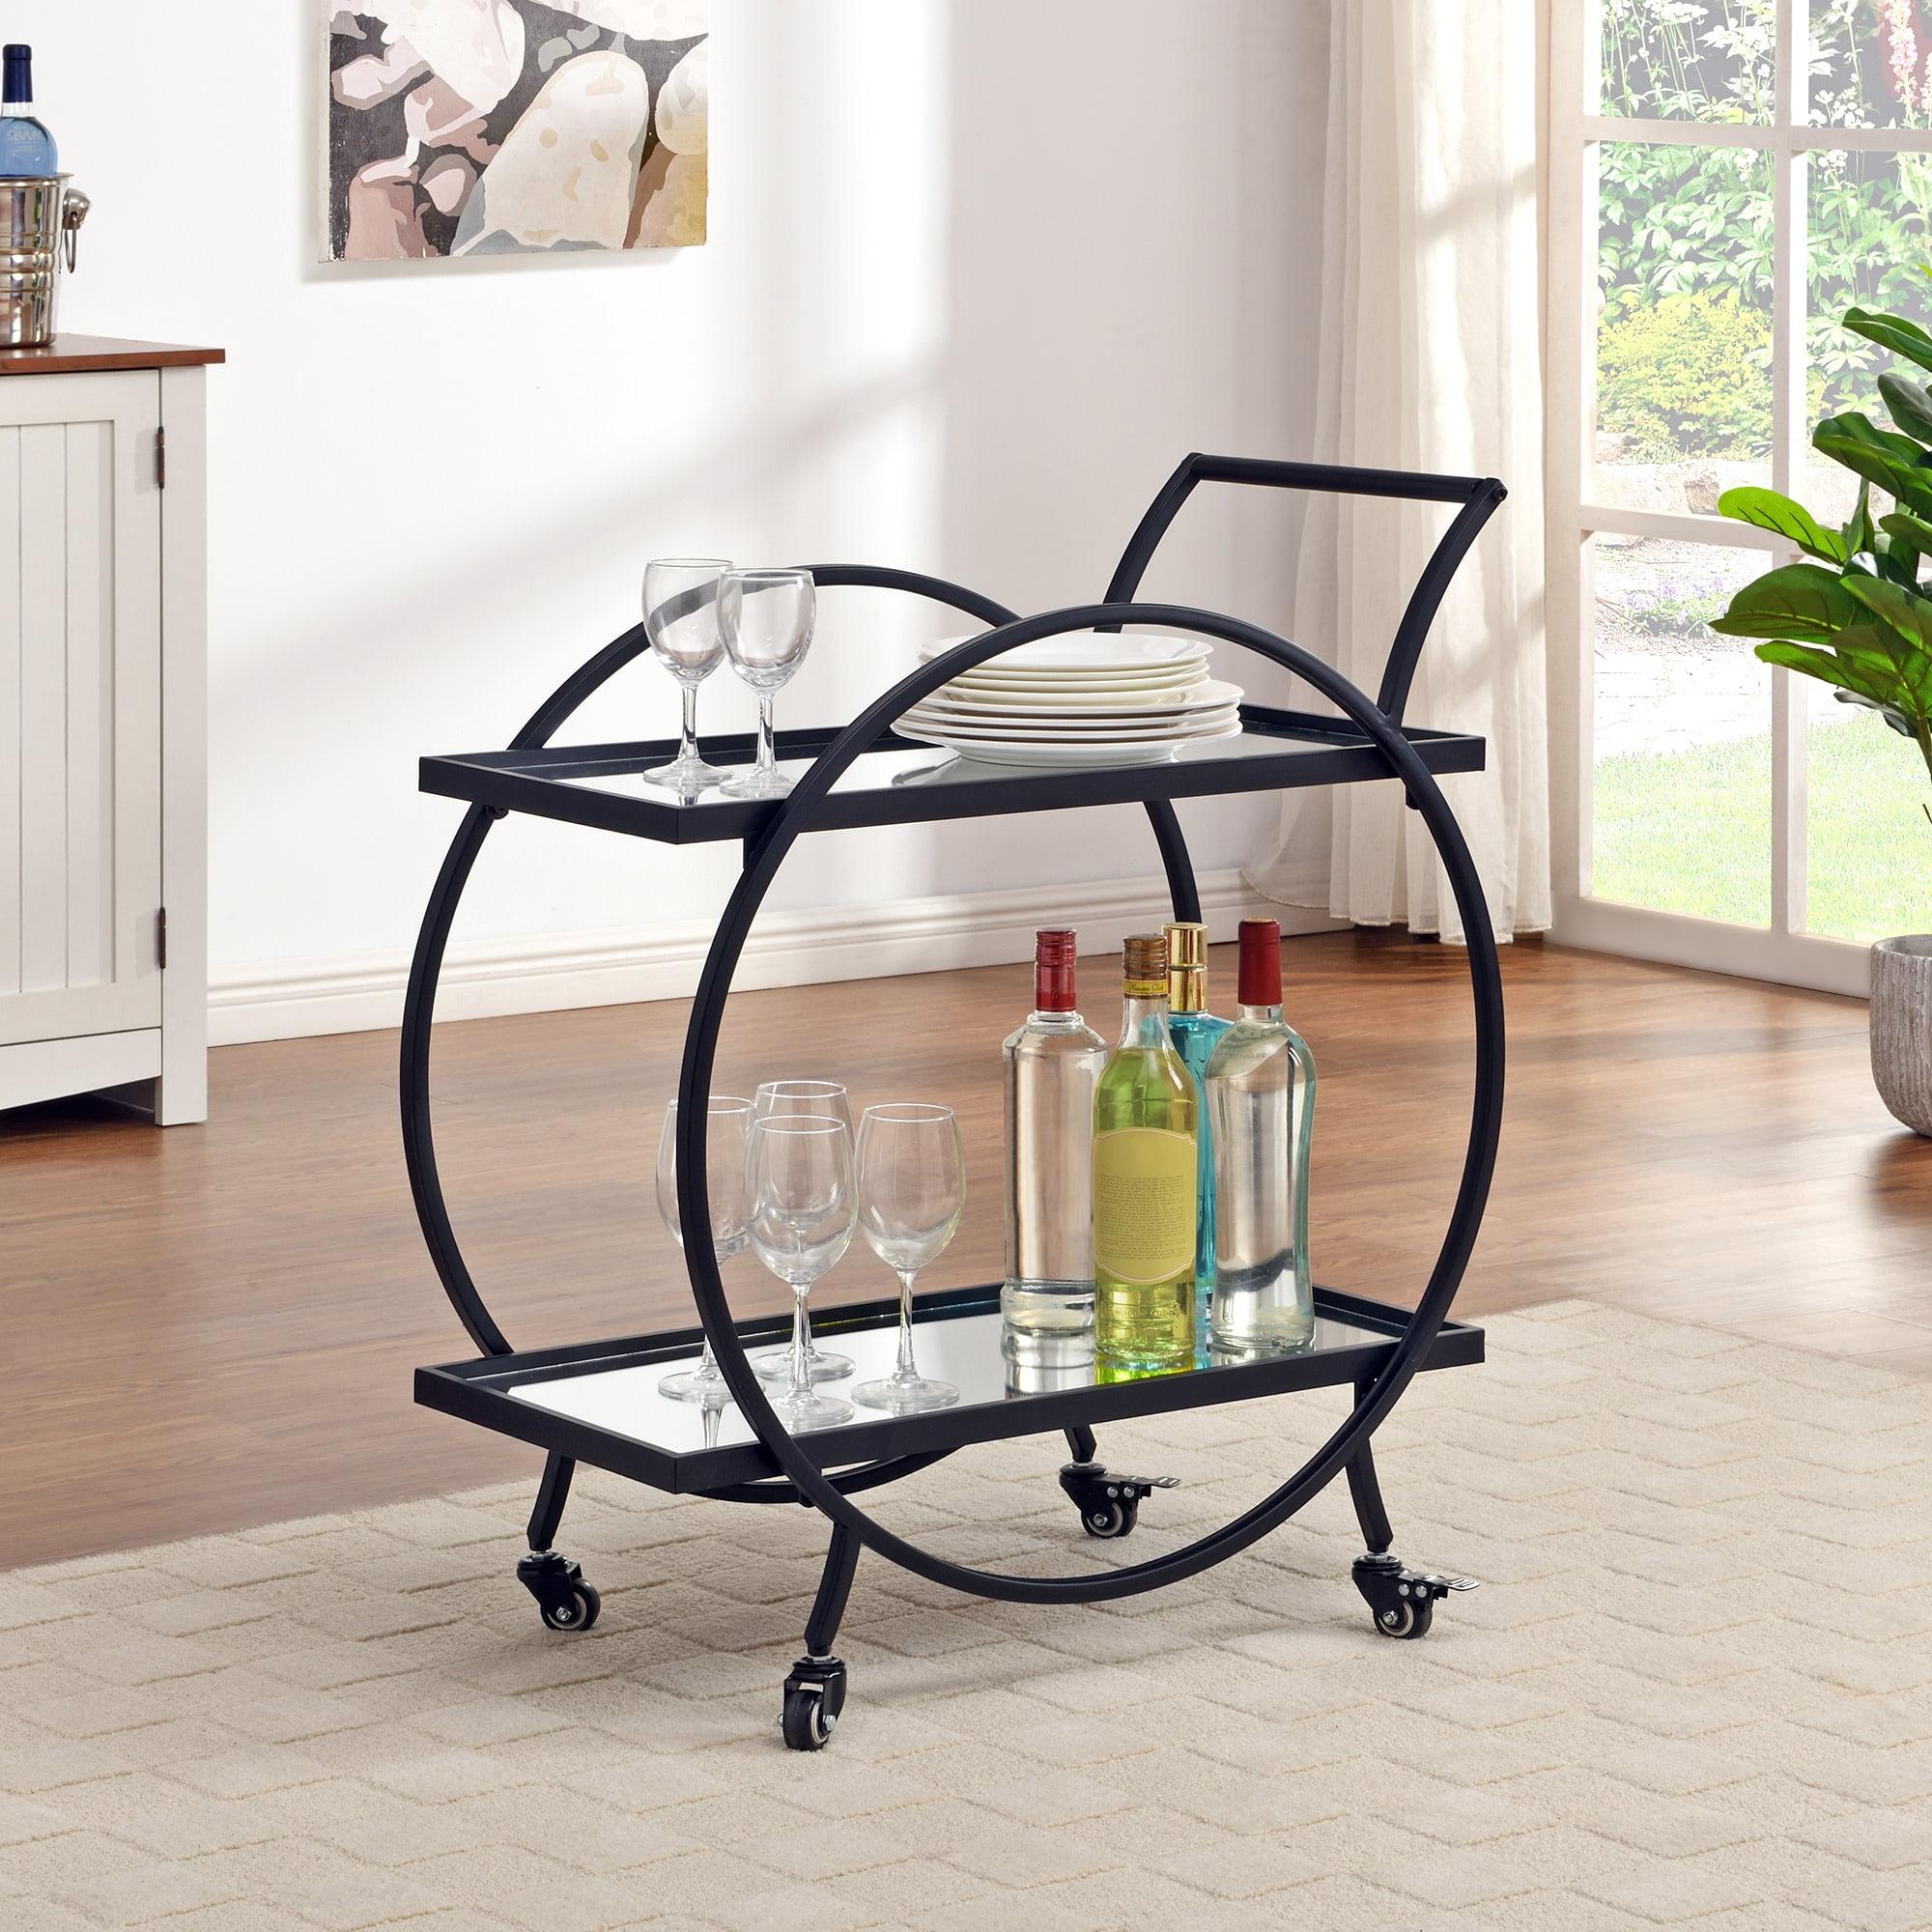 Odessa Glam Black Metal Round Bar Cart with Mirrored Shelves